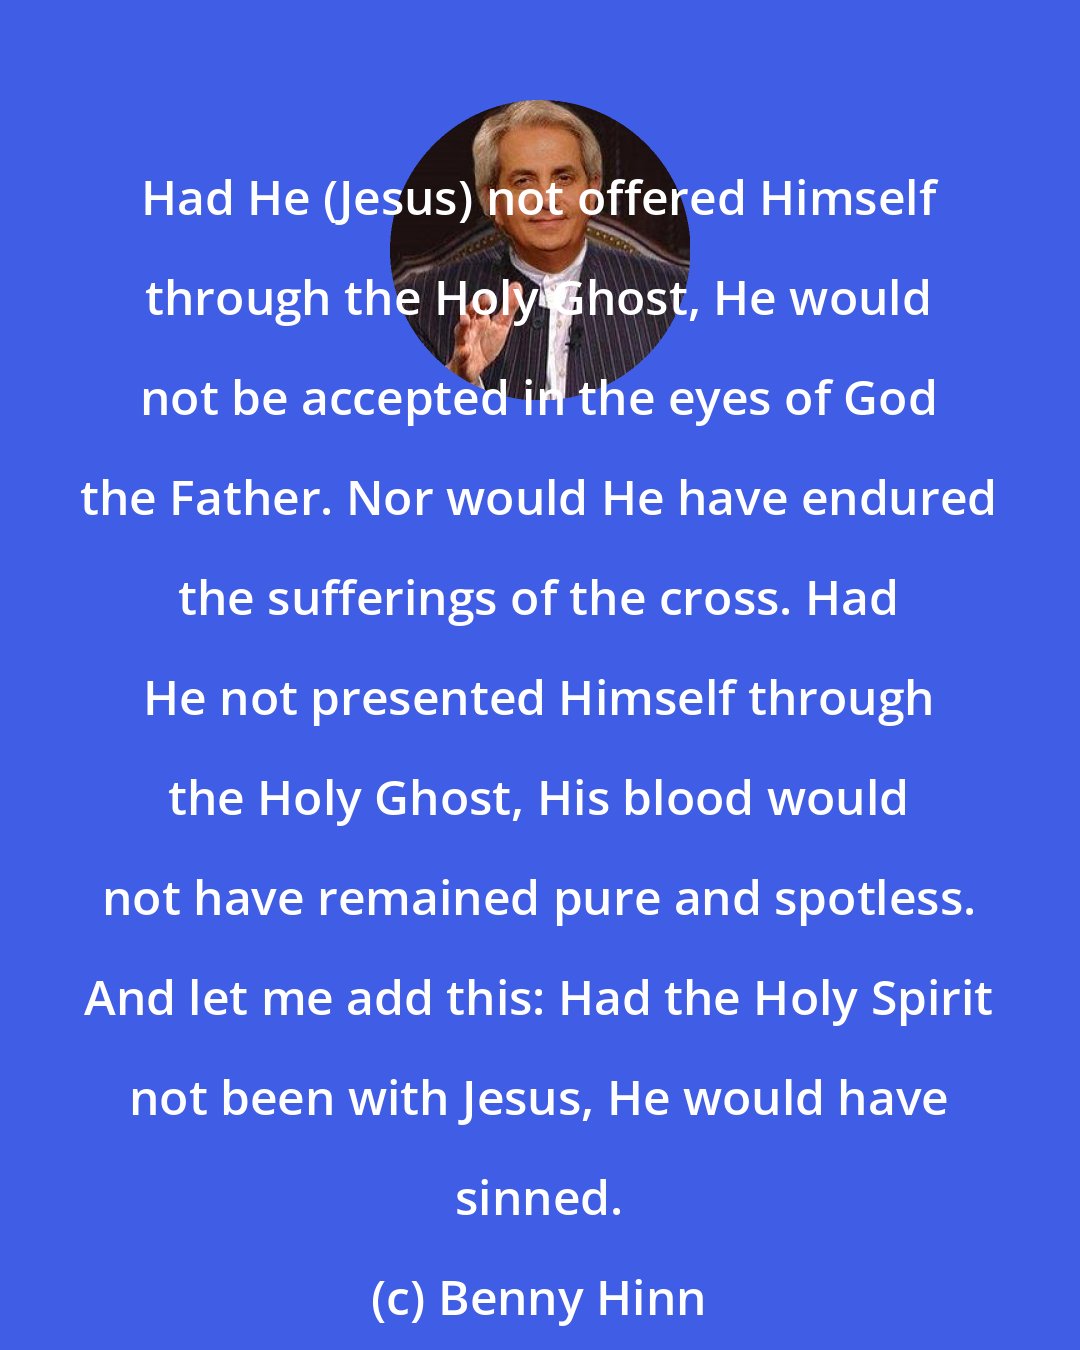 Benny Hinn: Had He (Jesus) not offered Himself through the Holy Ghost, He would not be accepted in the eyes of God the Father. Nor would He have endured the sufferings of the cross. Had He not presented Himself through the Holy Ghost, His blood would not have remained pure and spotless. And let me add this: Had the Holy Spirit not been with Jesus, He would have sinned.